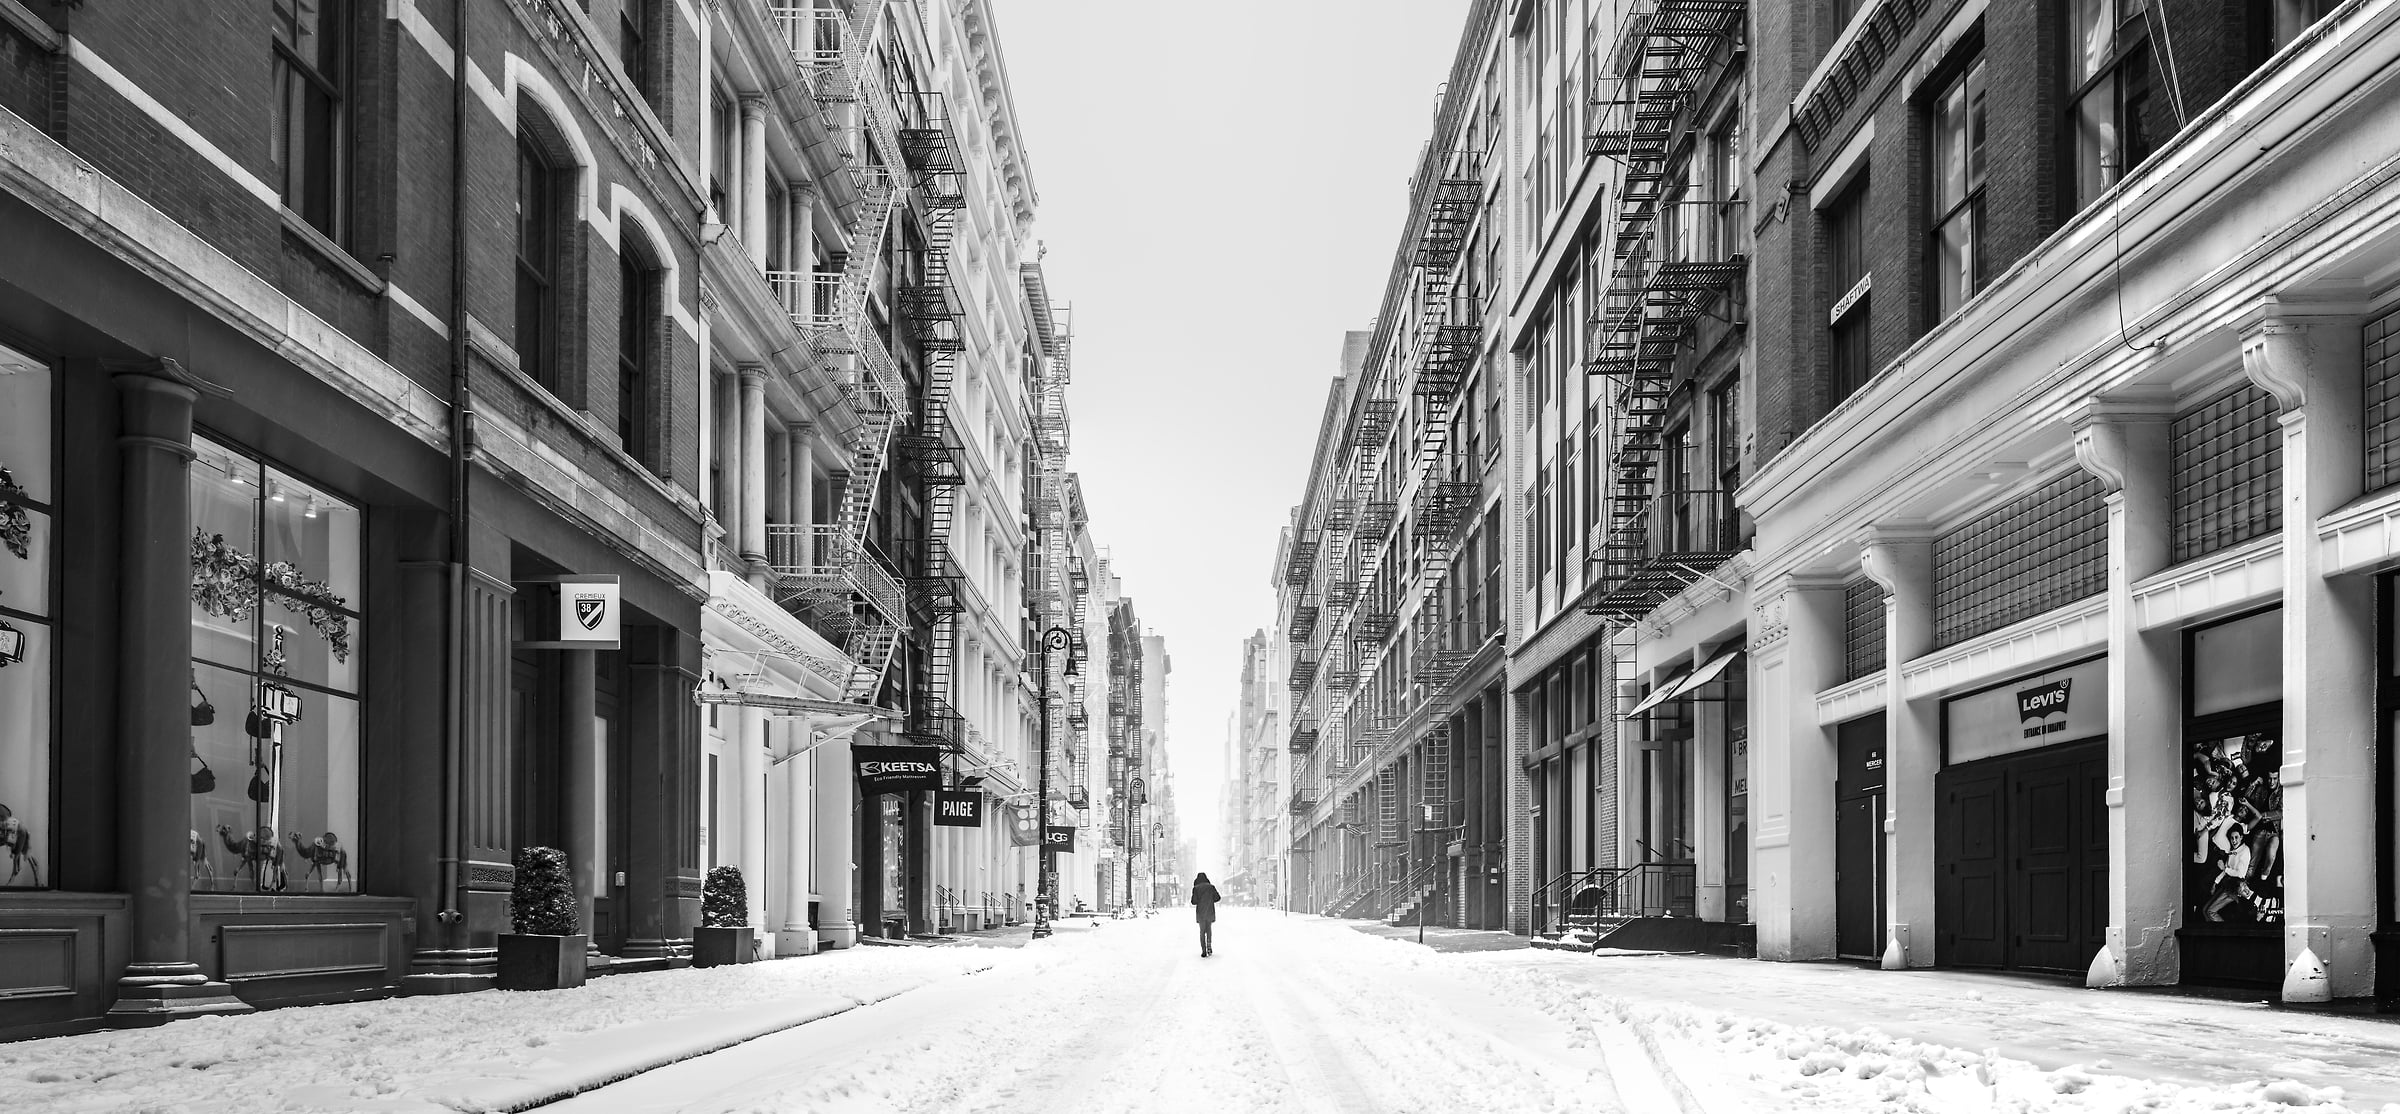 268 megapixels! A very high definition, large-format VAST photo print of Mercer Street in SoHo in NYC in winter snow; black and white fine art street photo created by Dan Piech in New York City